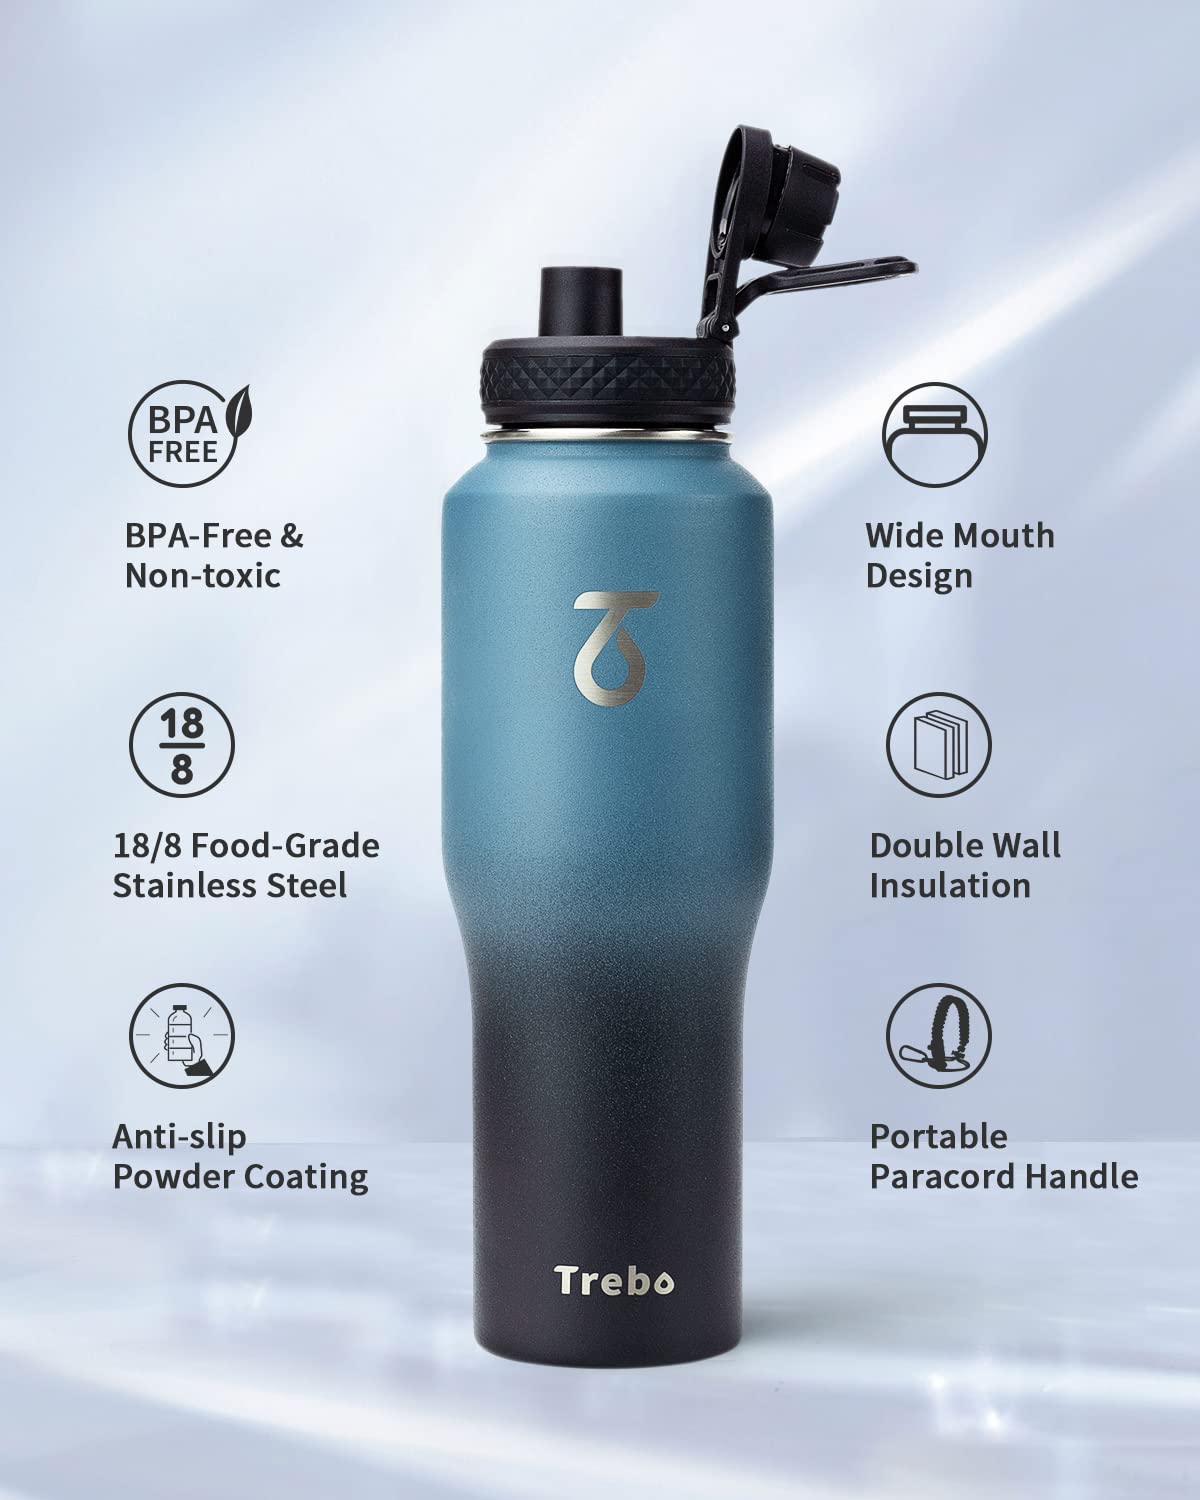 Trebo 32oz Insulated Water Bottle that Fits in Cup Holder, Stainless Steel Double Wall Tumbler Flask Bottles with Paracord Handle, with Straw Spout Lids, Keep Cold for 48 Hrs/Hot 24 Hrs,Indigo/Black